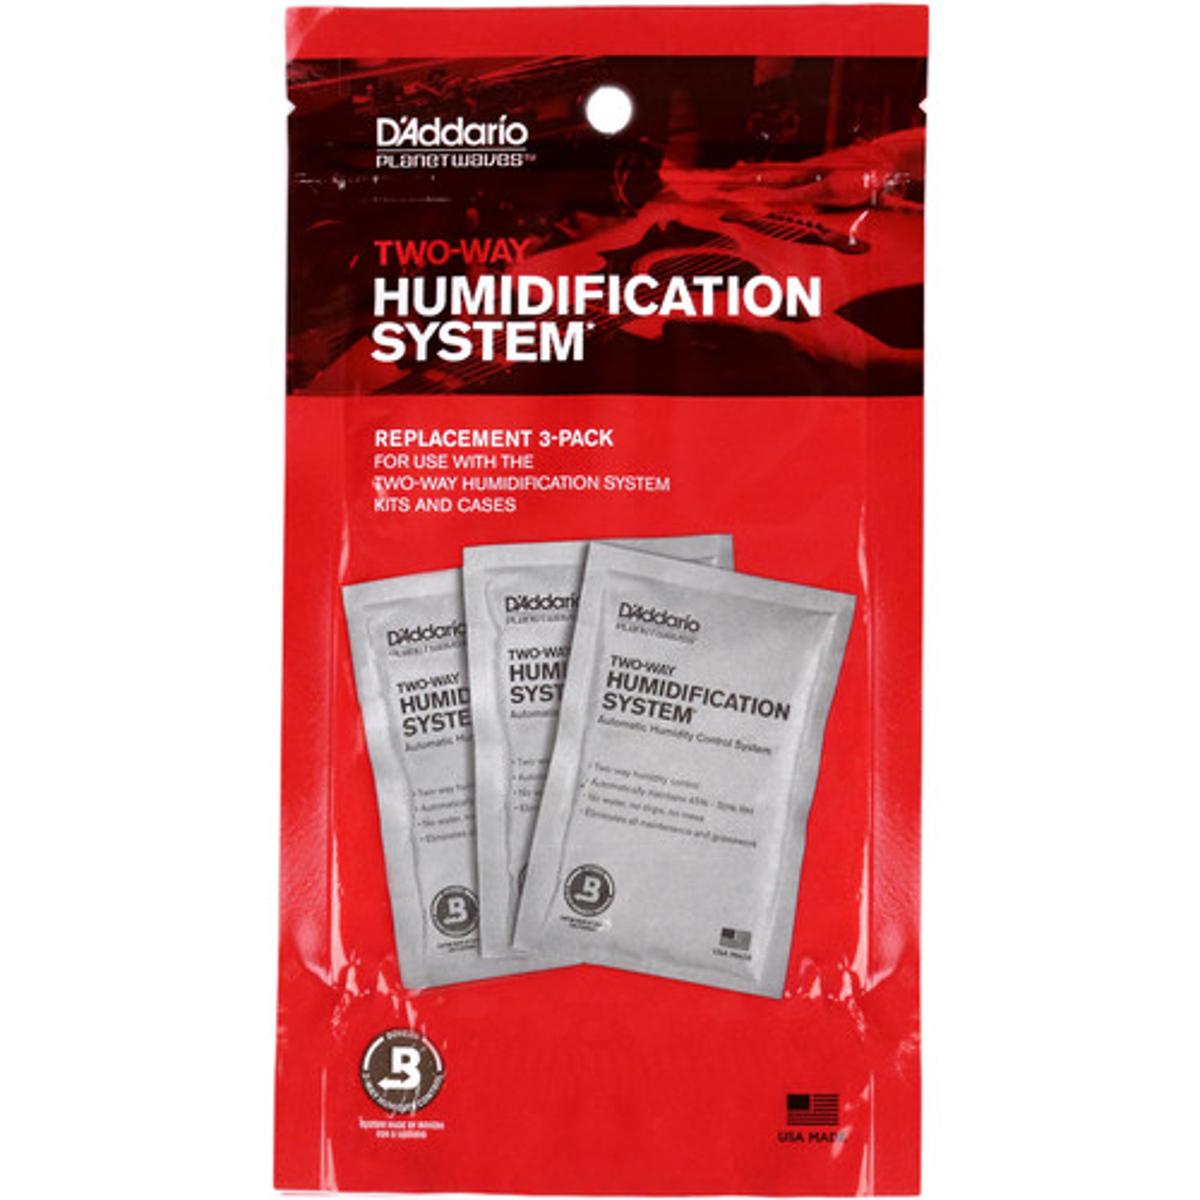 D'Addario Planet Waves PW-HPRP-03 Two-Way Humidification System Replacement Packets - 3-Pack